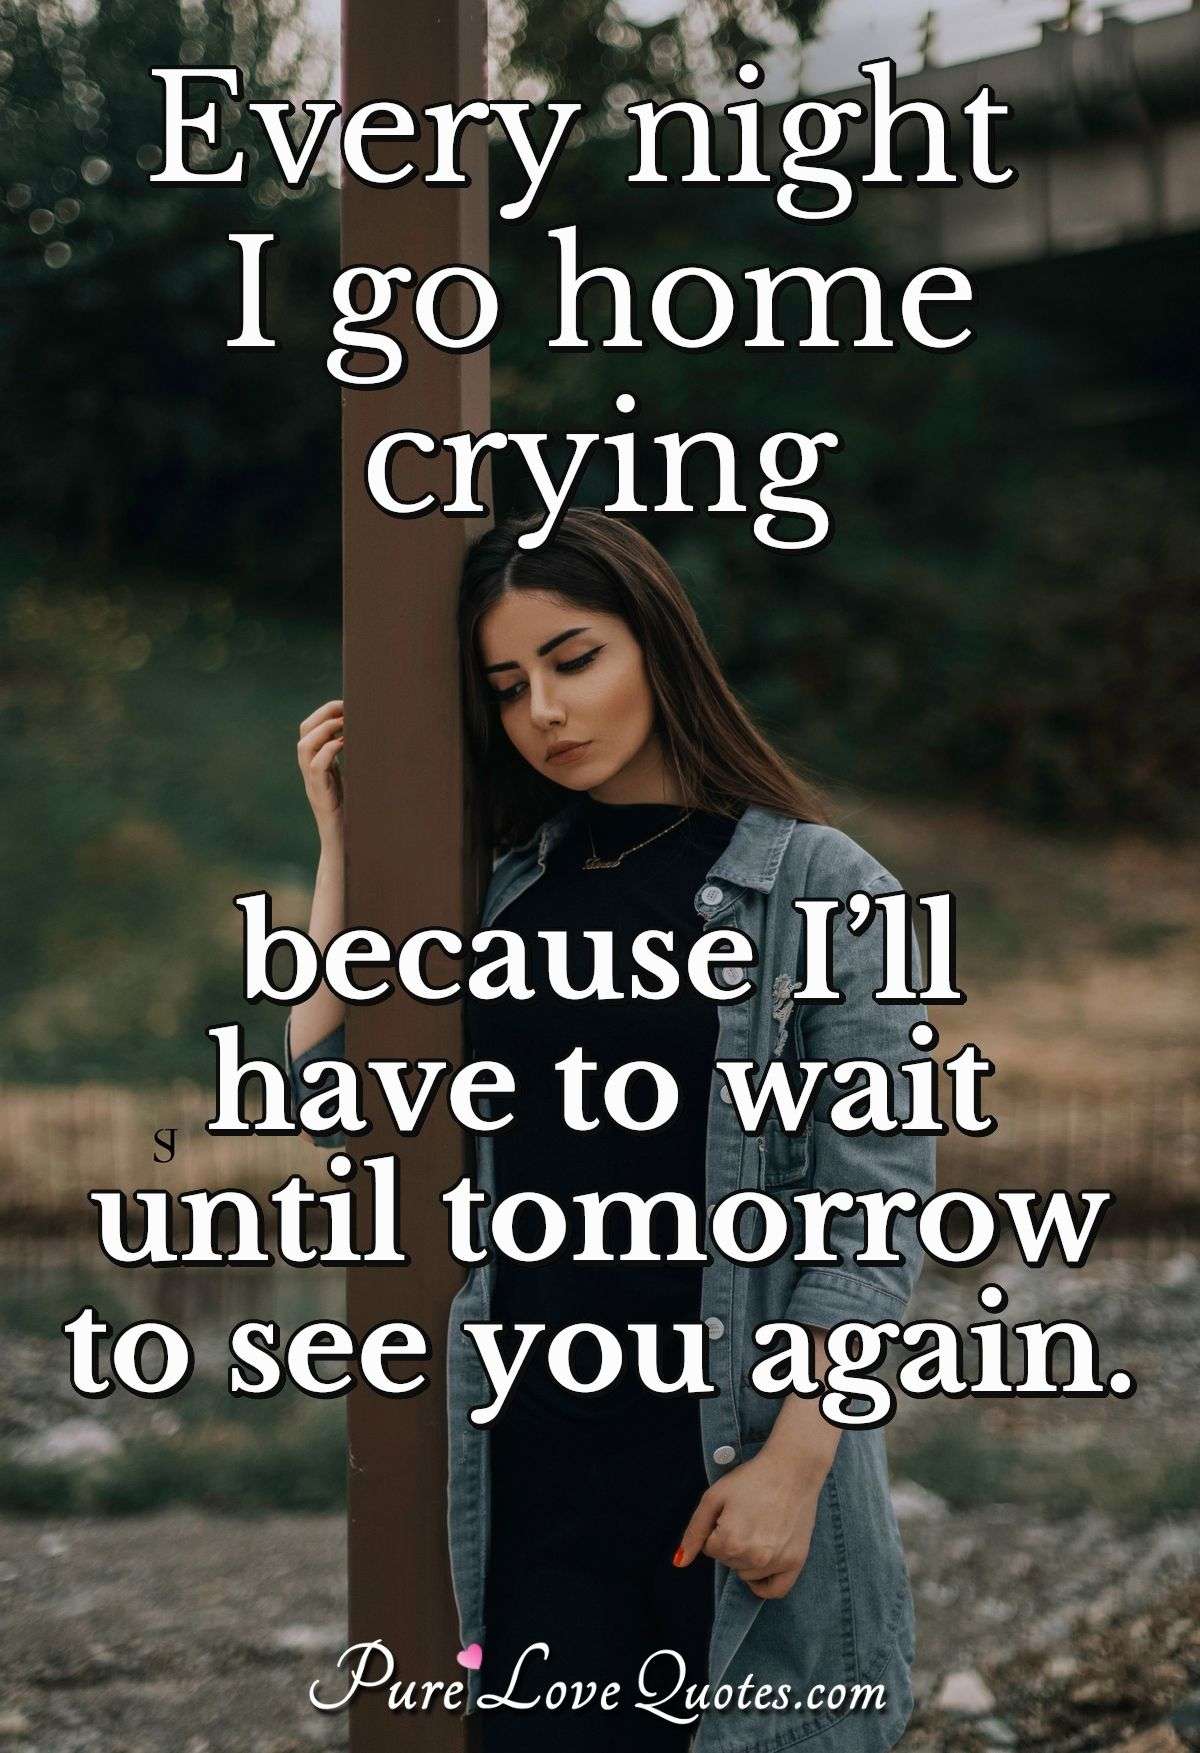 Every night I go home crying because I’ll have to wait until tomorrow to see you again. - Anonymous